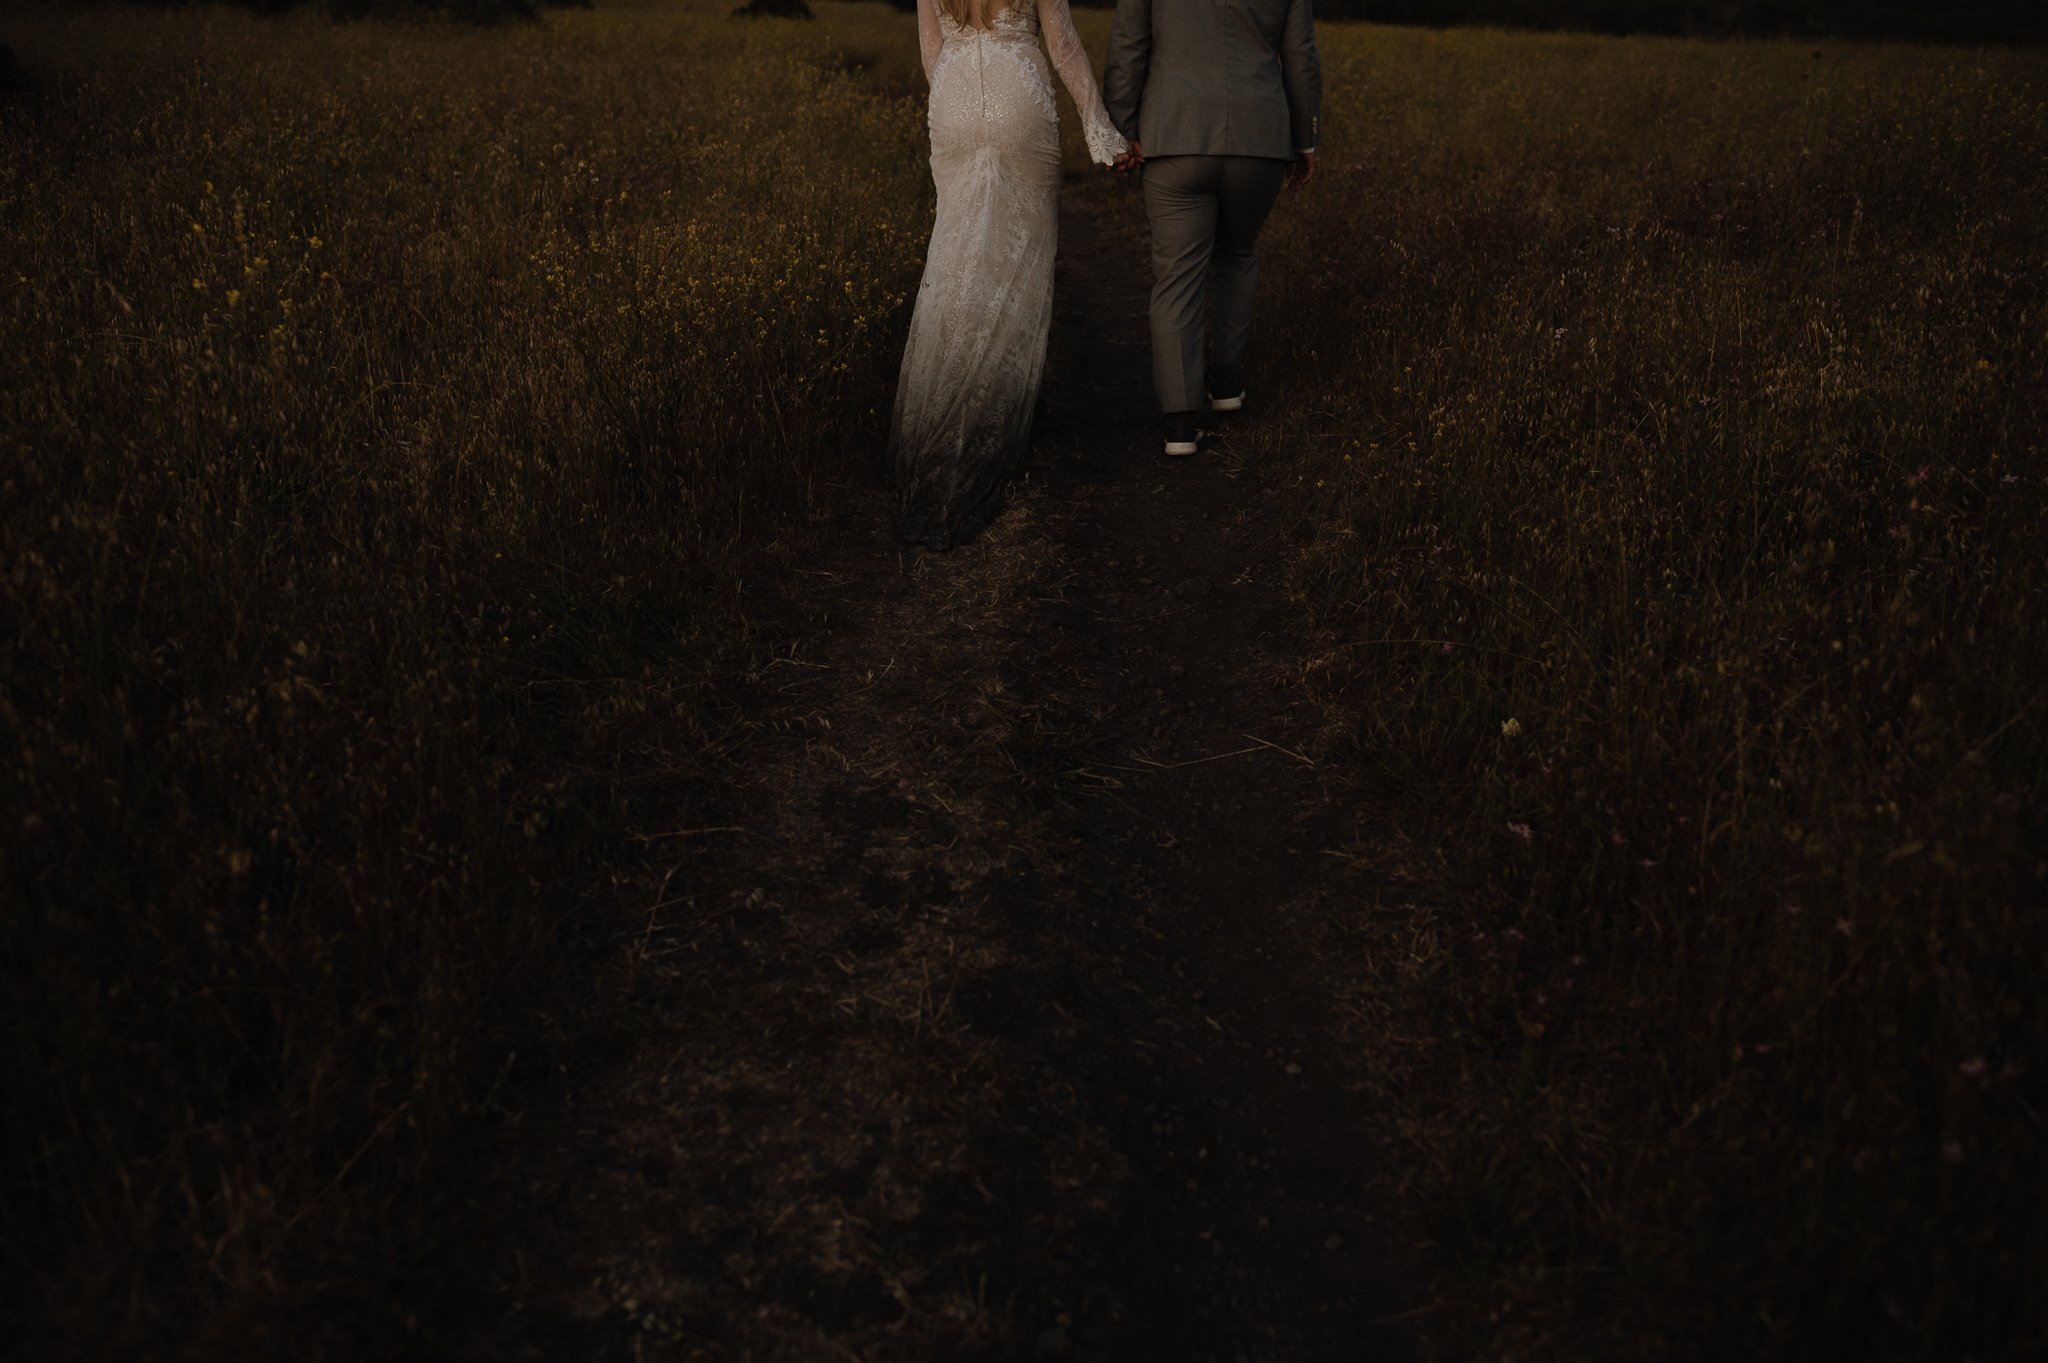 Big Sur Ventana wedding bride and groom walking holding hands up a hilly area through the grass